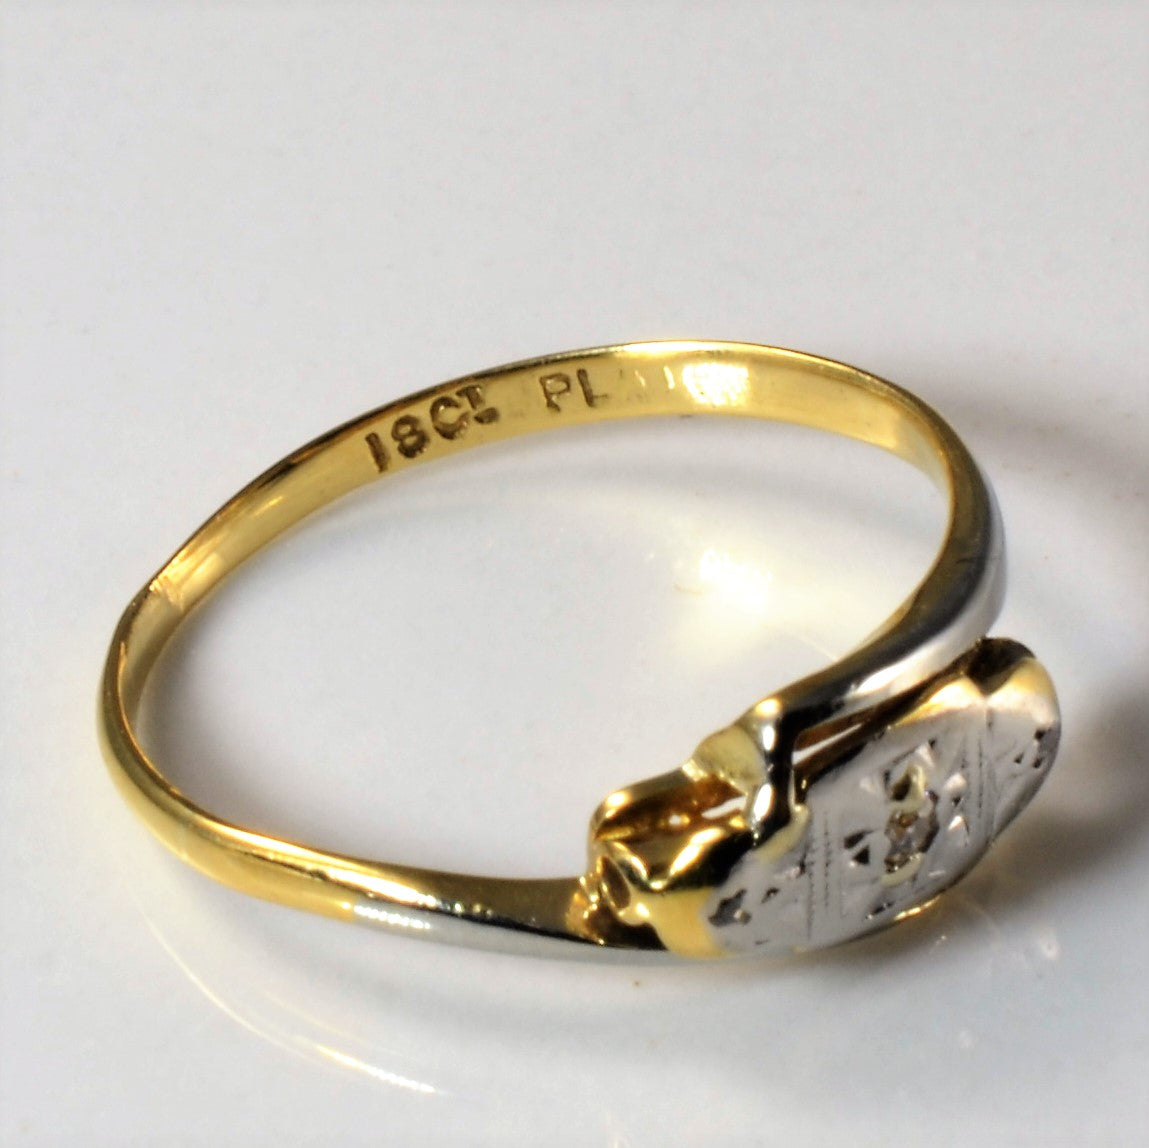 Canadian vintage engagement ring with gold and diamonds